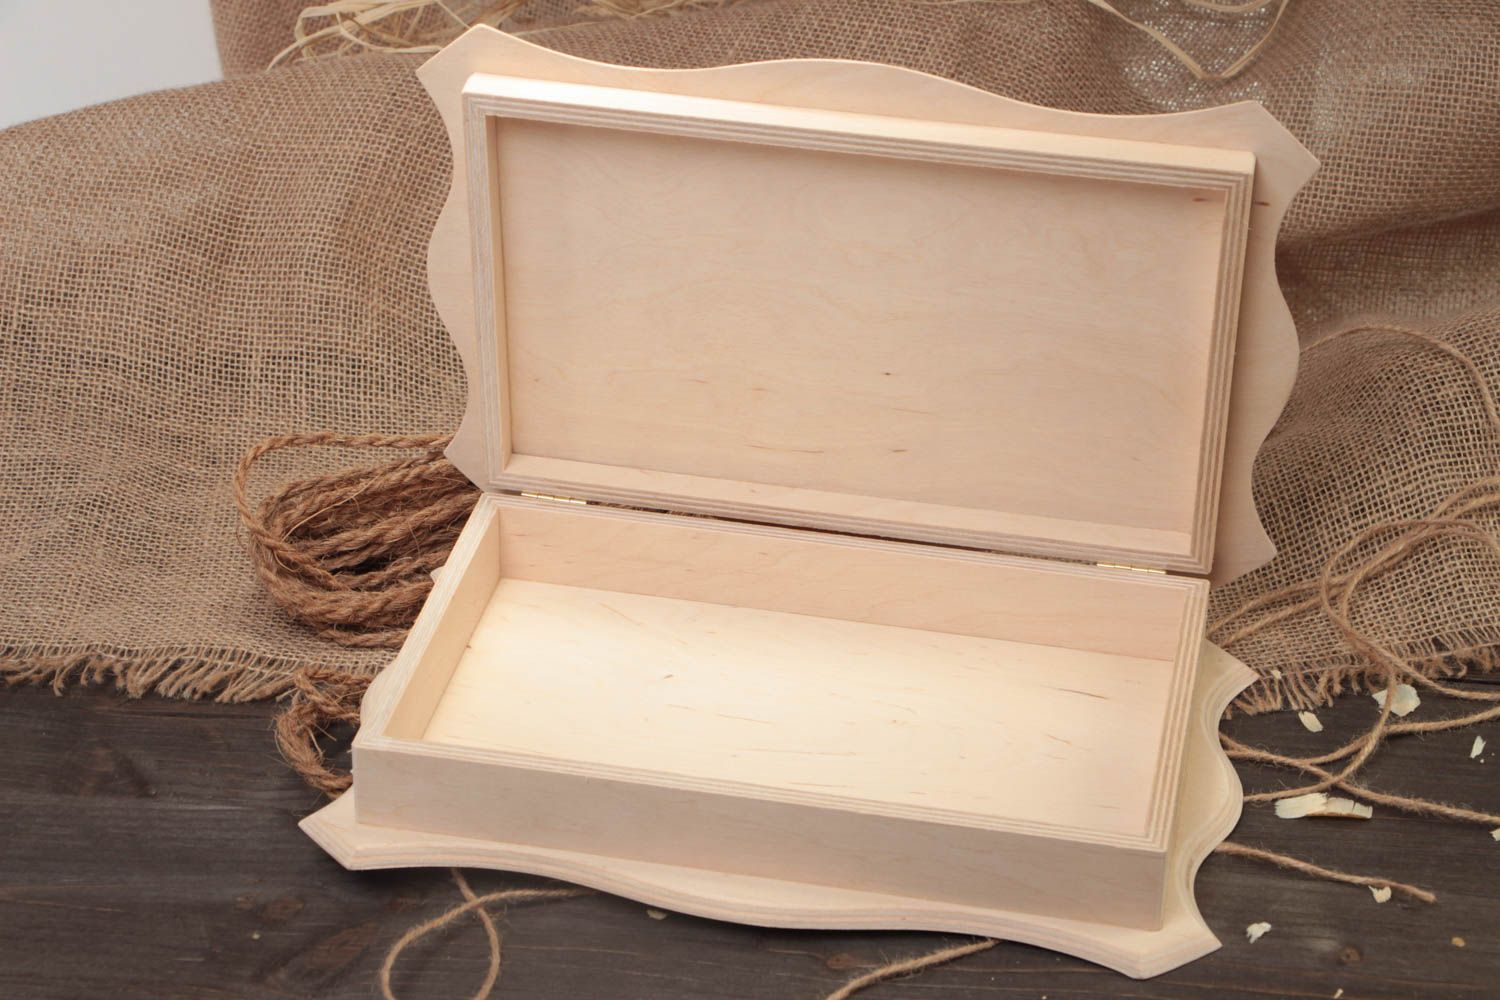 Plywood handcrafted designer jewelry box blank for painting and decoupage photo 1